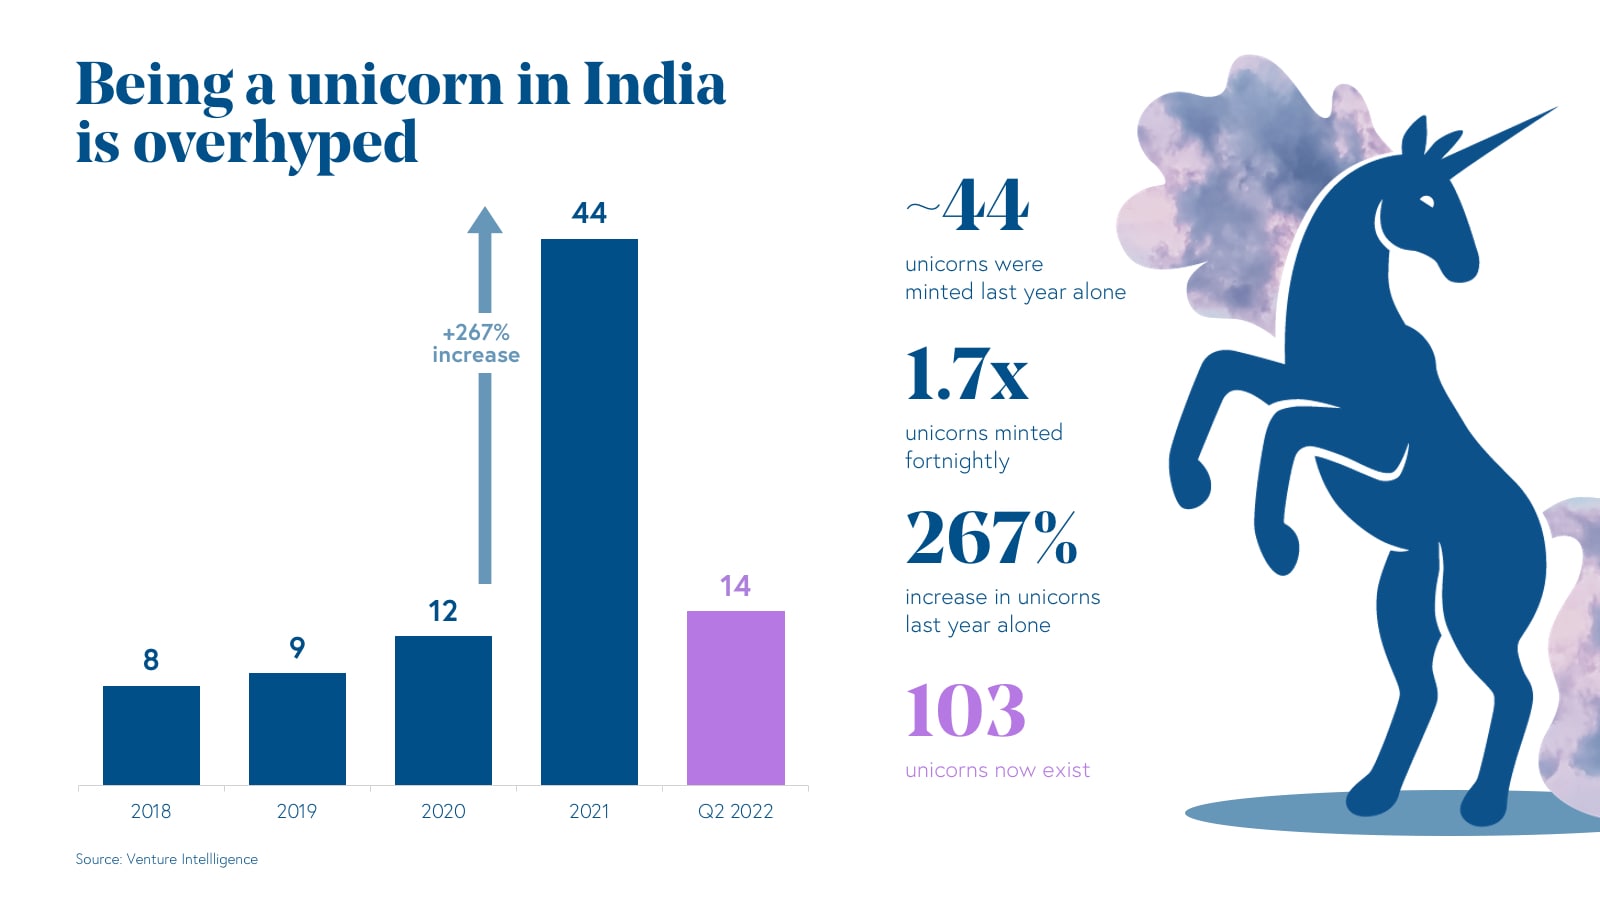 Being a unicorn in India is overhyped